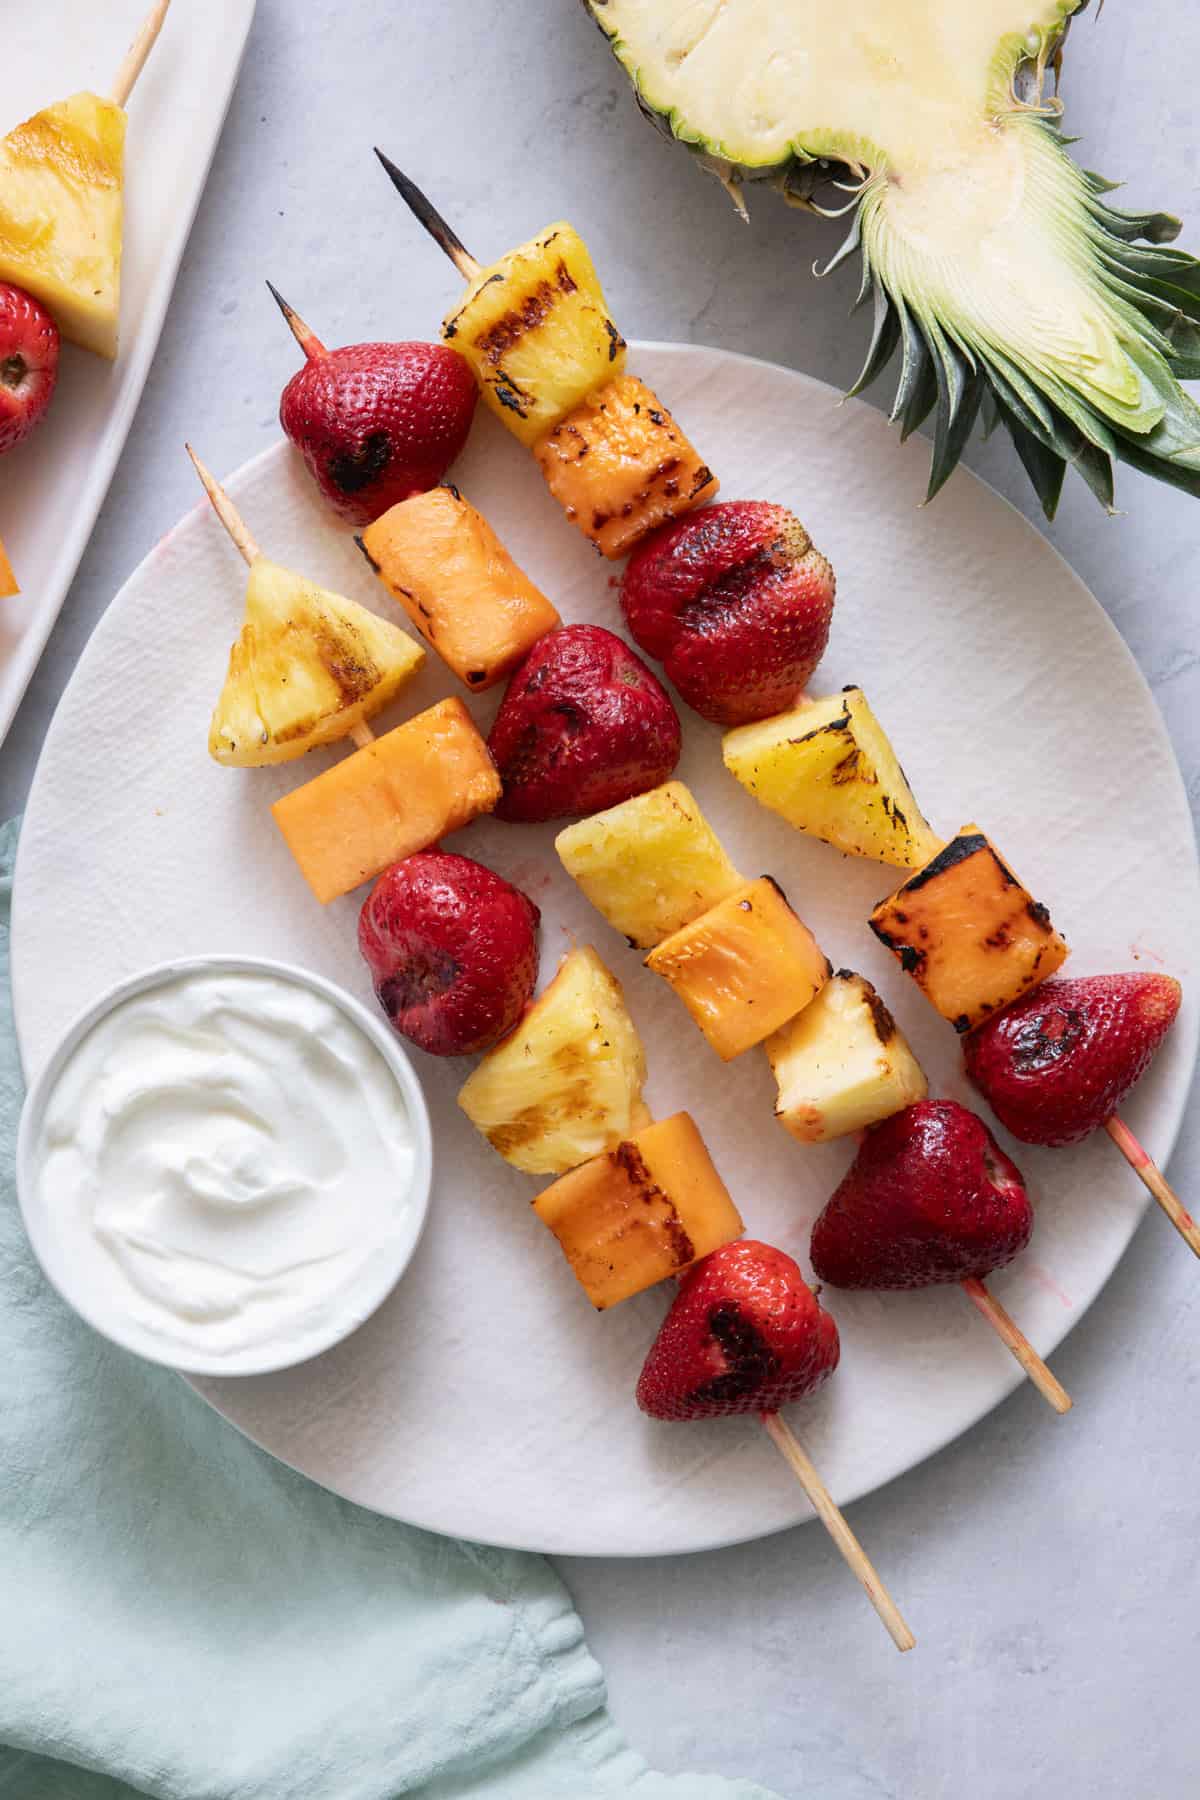 3 grilled fruit kabobs of cantaloupe, pineapples, and strawberries, with a side of yogurt for dipping.